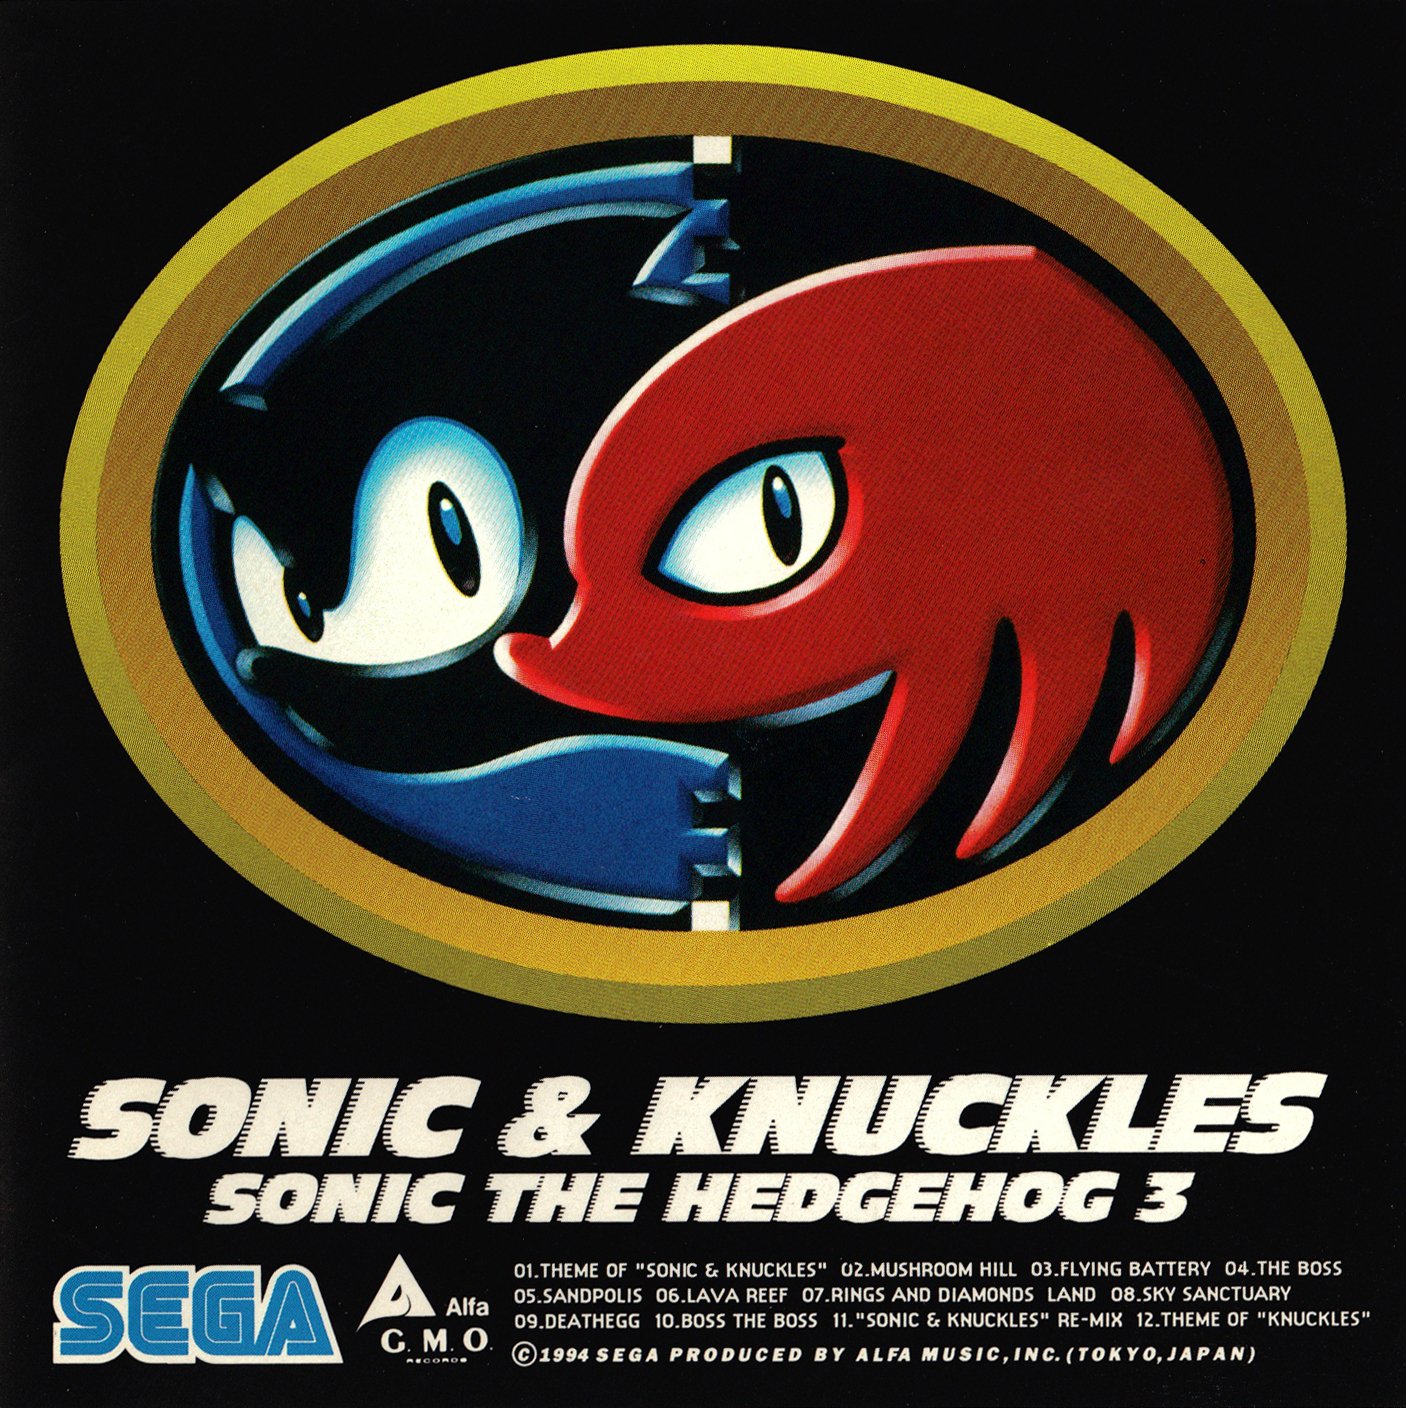 The Sonic Movie 「Sonic VS Knuckles 」 pamphlet from JAPAN